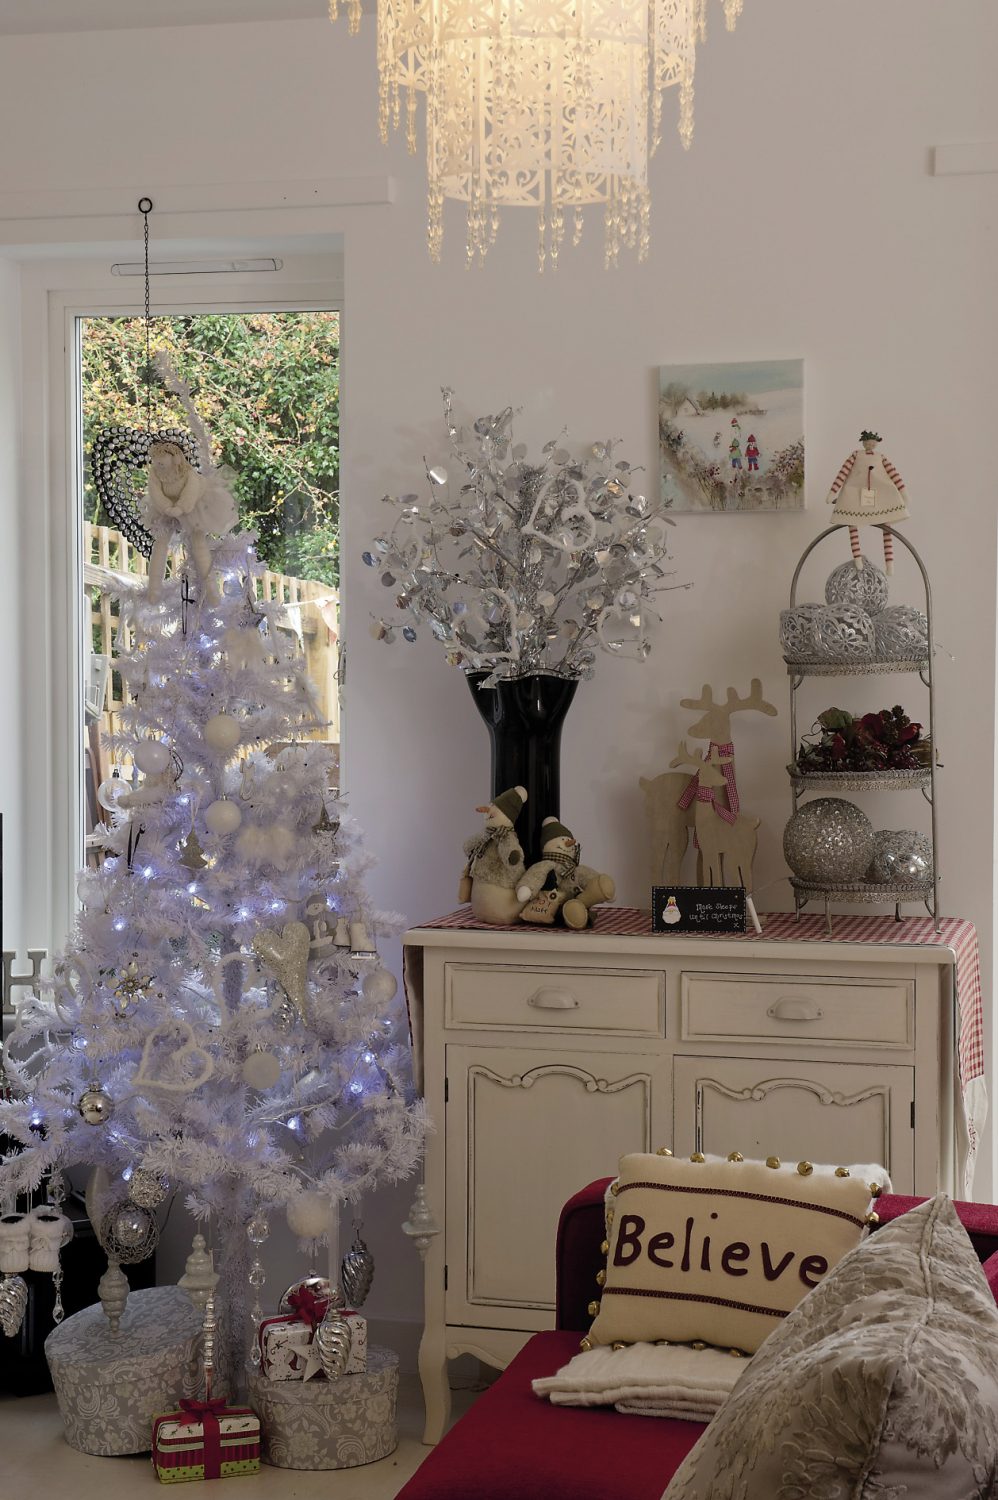 A console table is covered with a red and white gingham runner and a three-tiered sweetmeat stand displays a collection of large baubles as well as a red and white stripy-stockinged peg doll